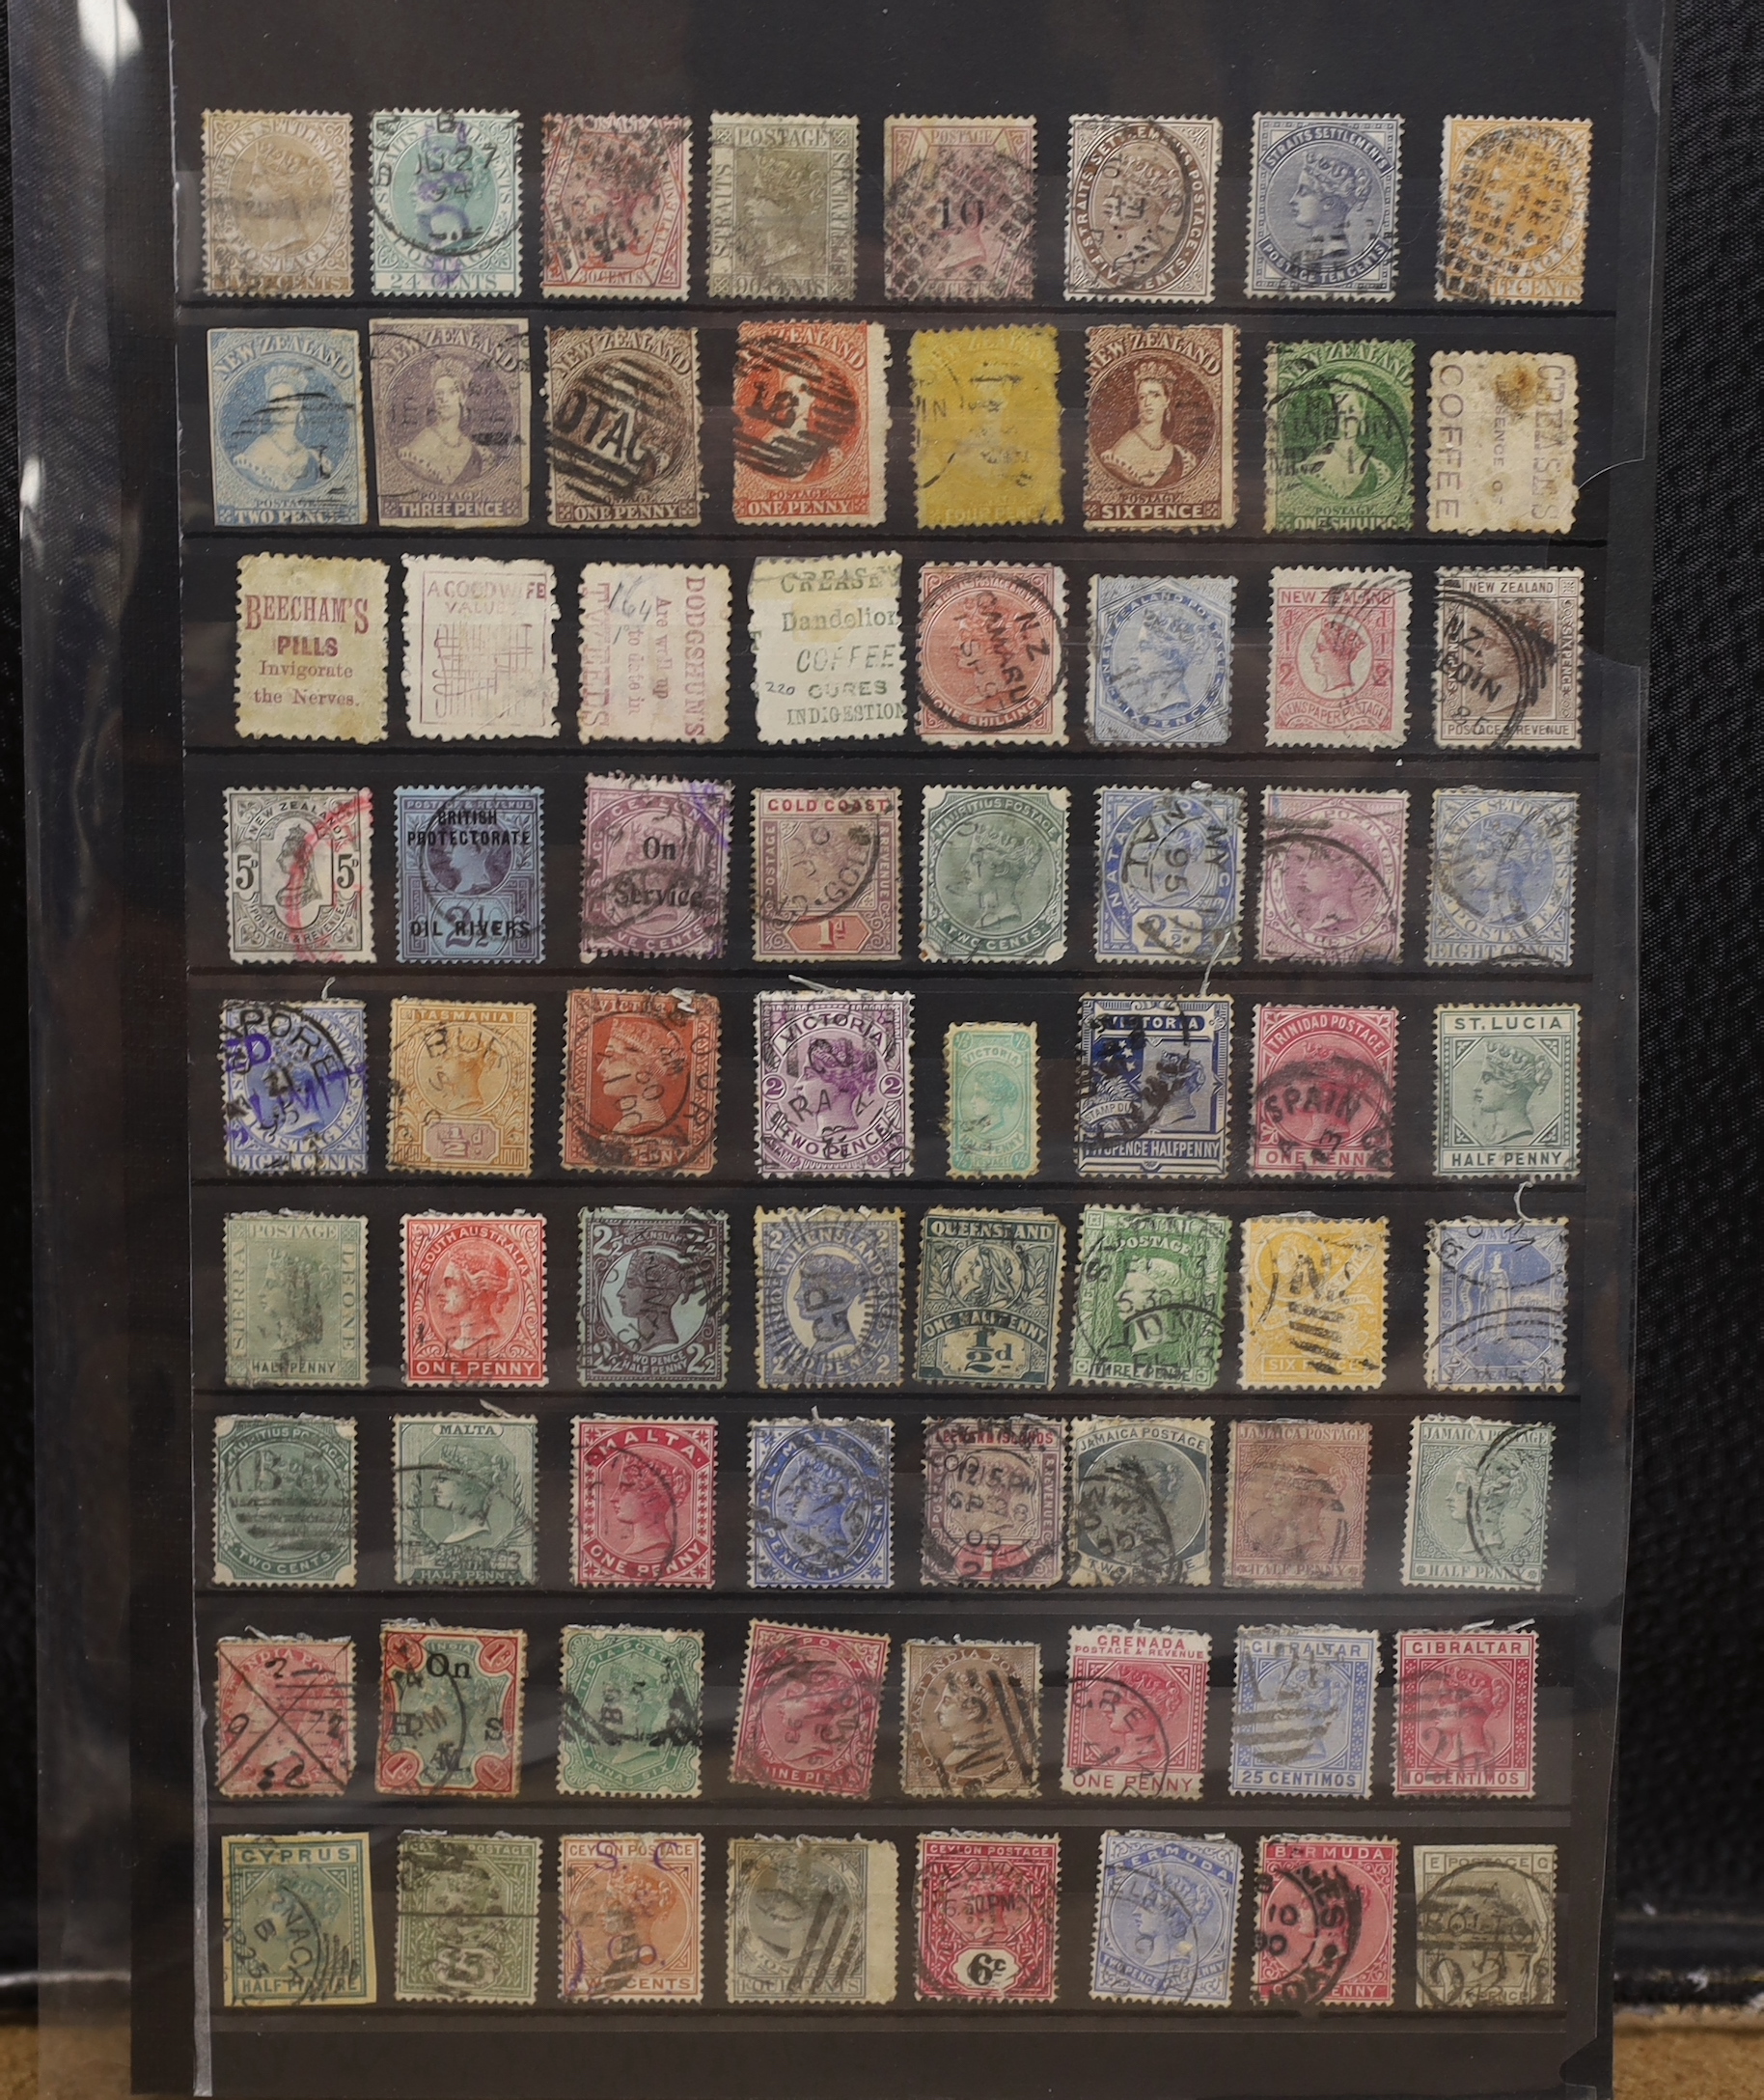 Three hundred and sixty GB and Commonwealth stamps, 19th century